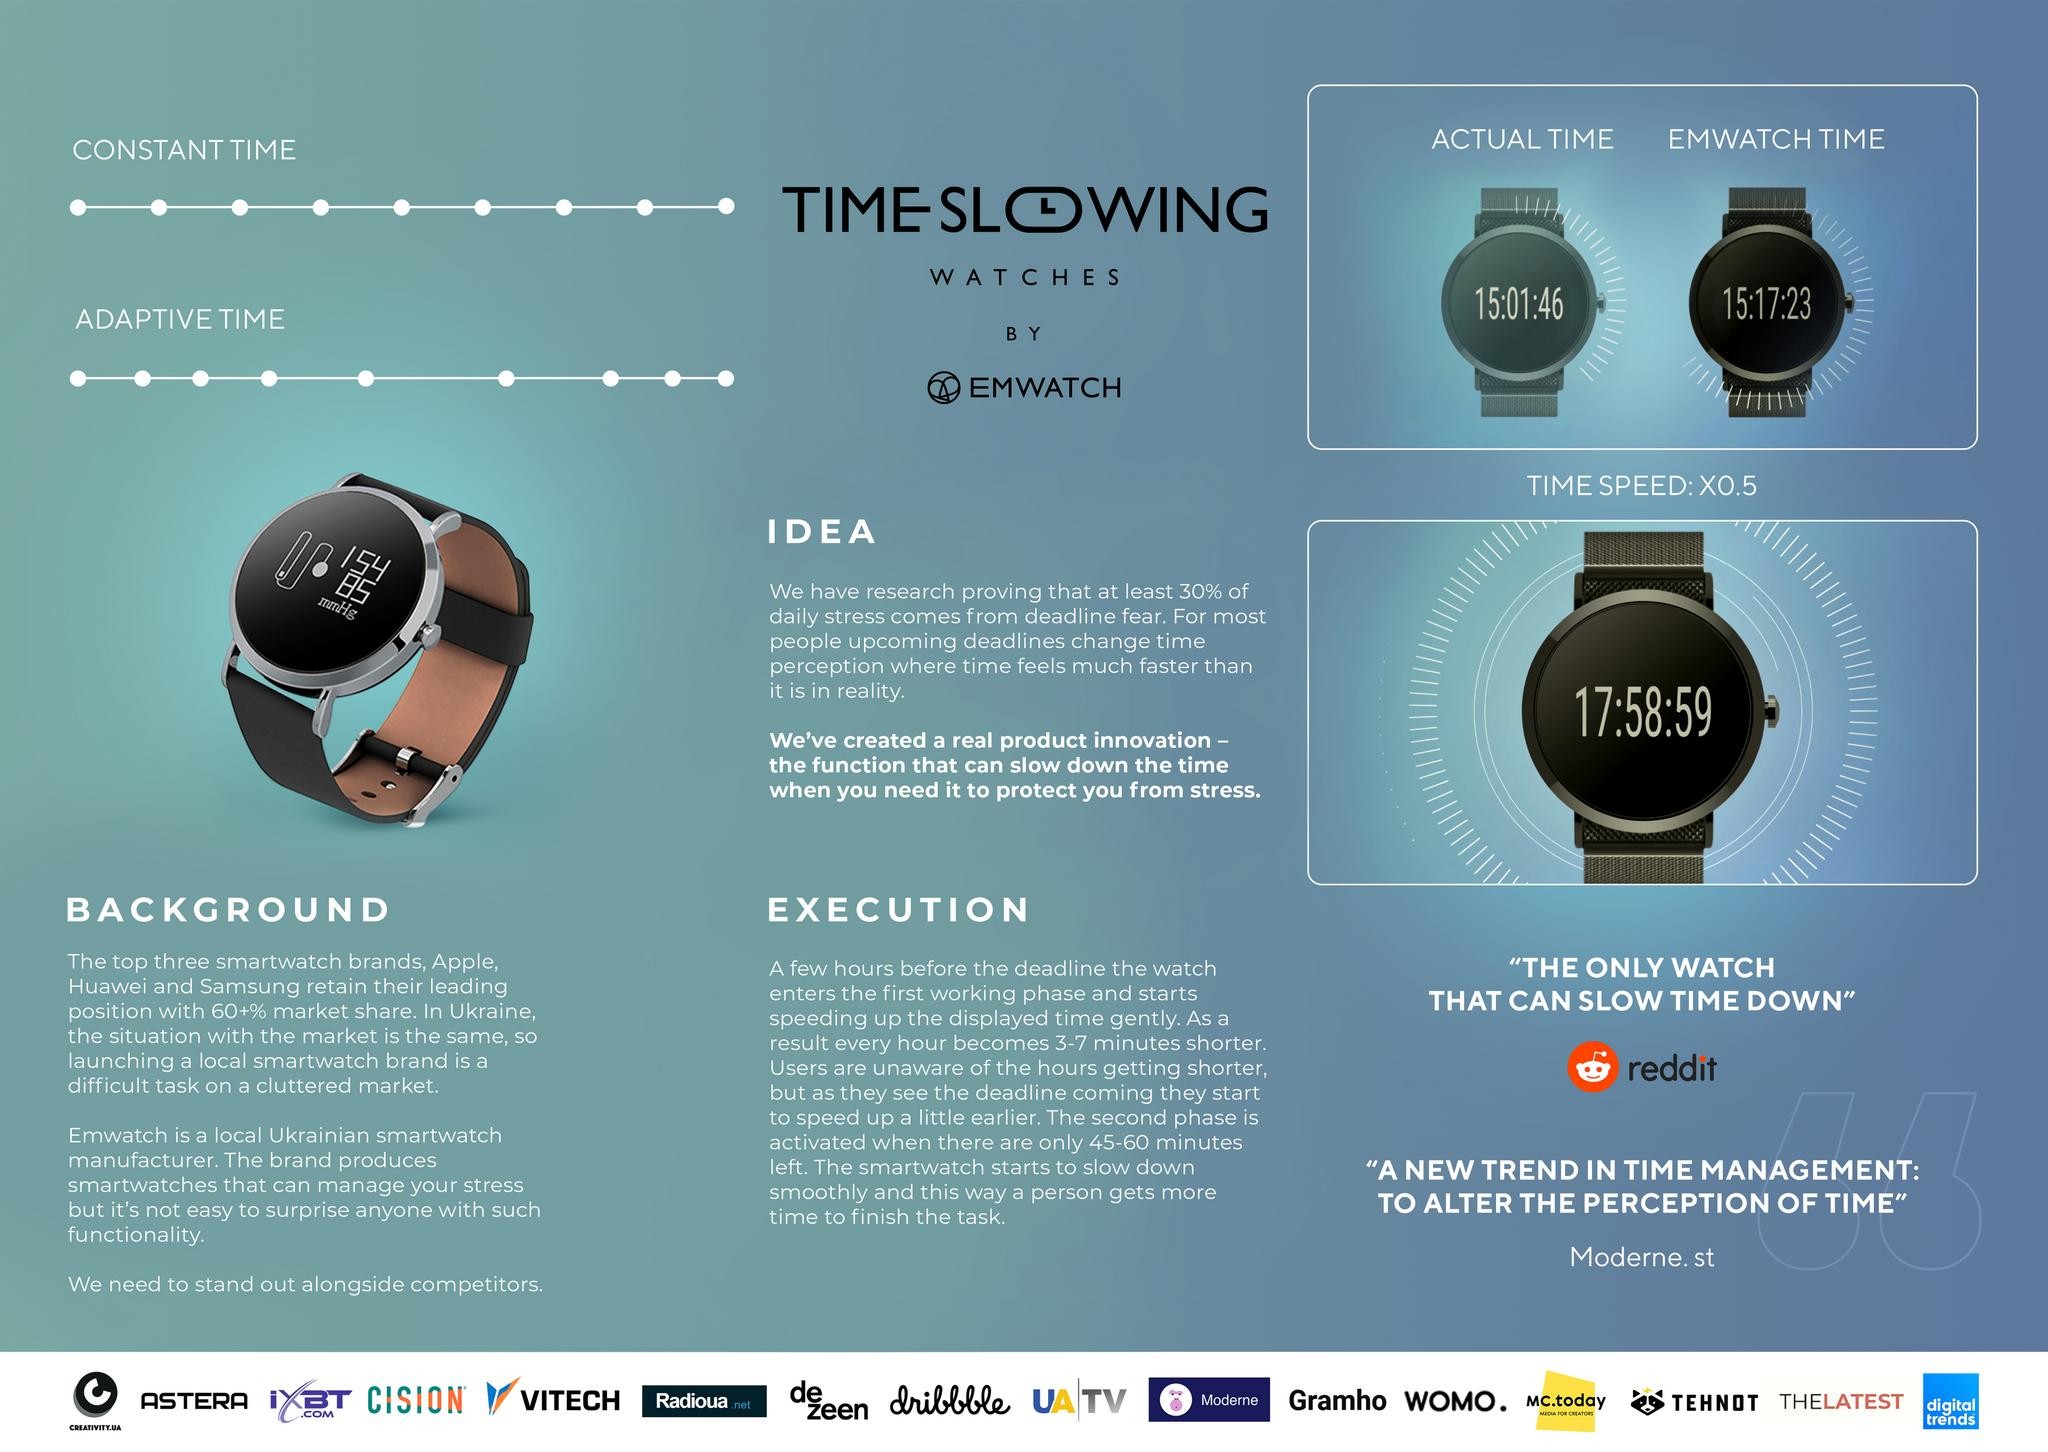 TIME-SLOWING WATCHES